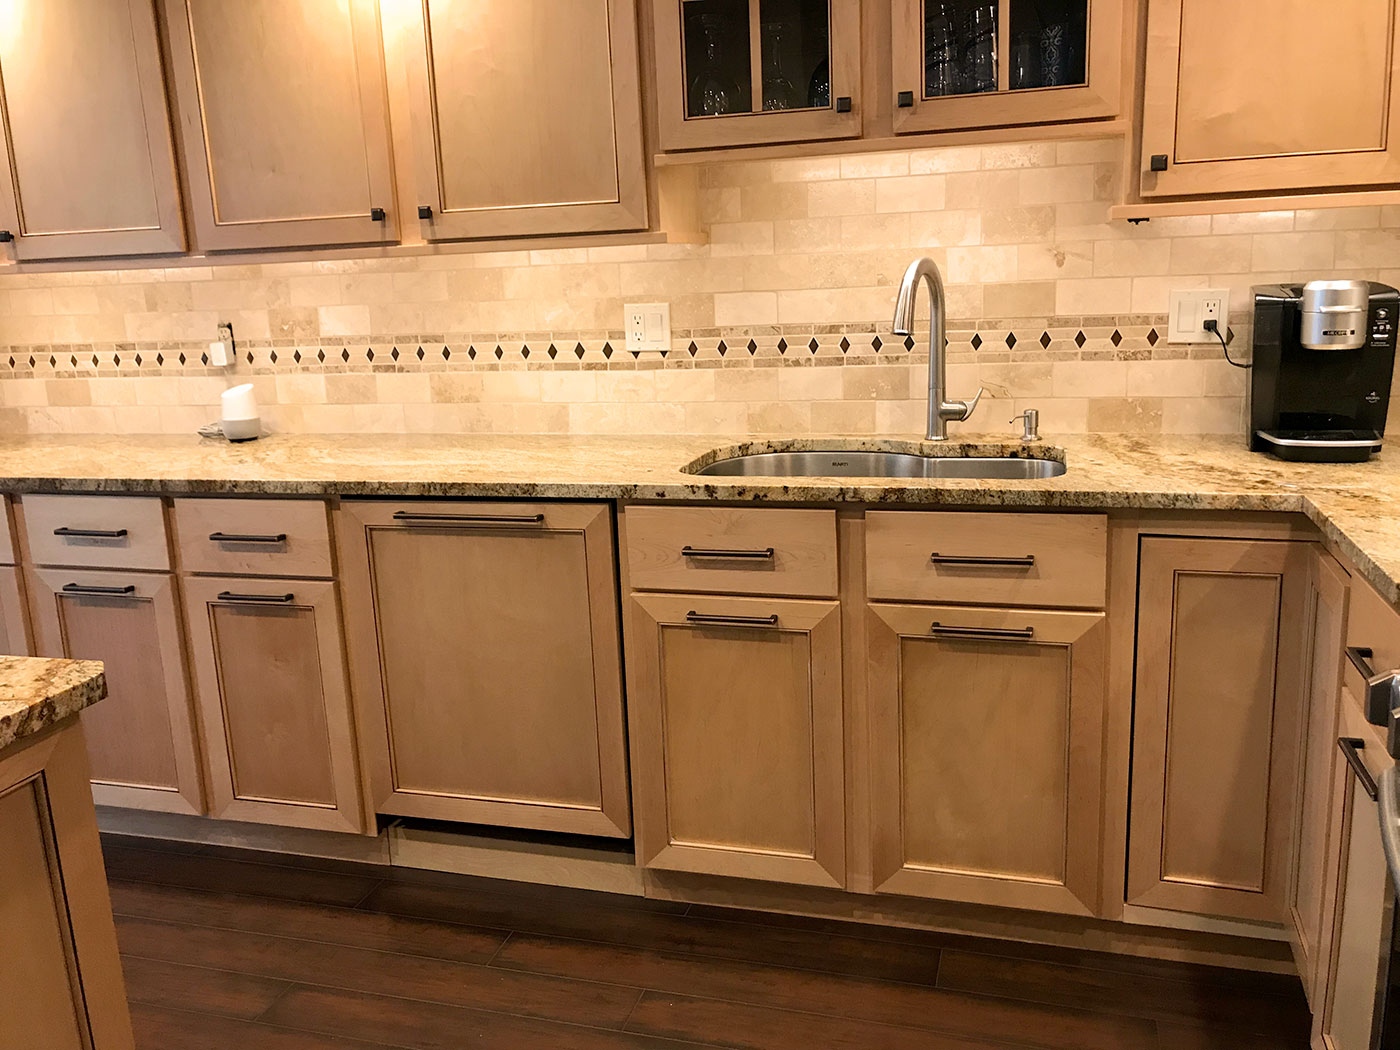 Standard / Hybrid Kitchen Cabinets - Craftworks Custom Cabinetry - Rochester, NY